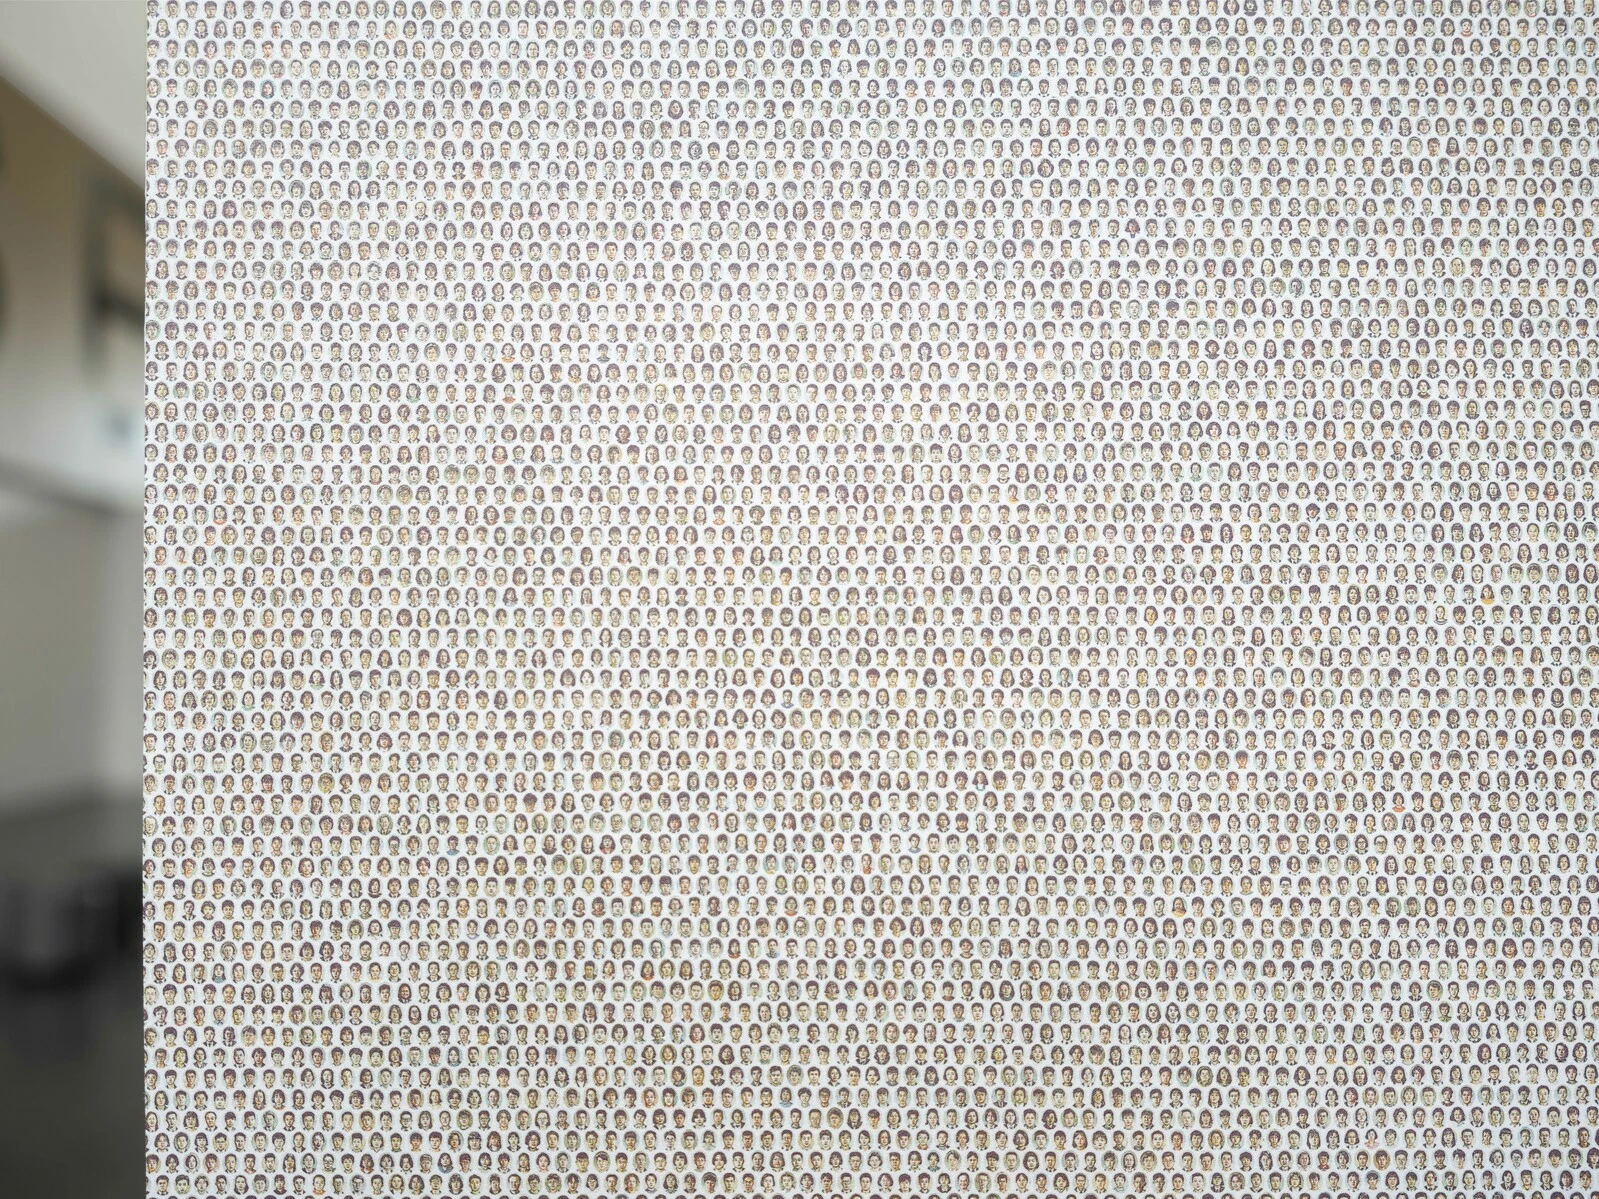 A corner of a wall filled with a wallpaper of dots made from drawings of people's faces.